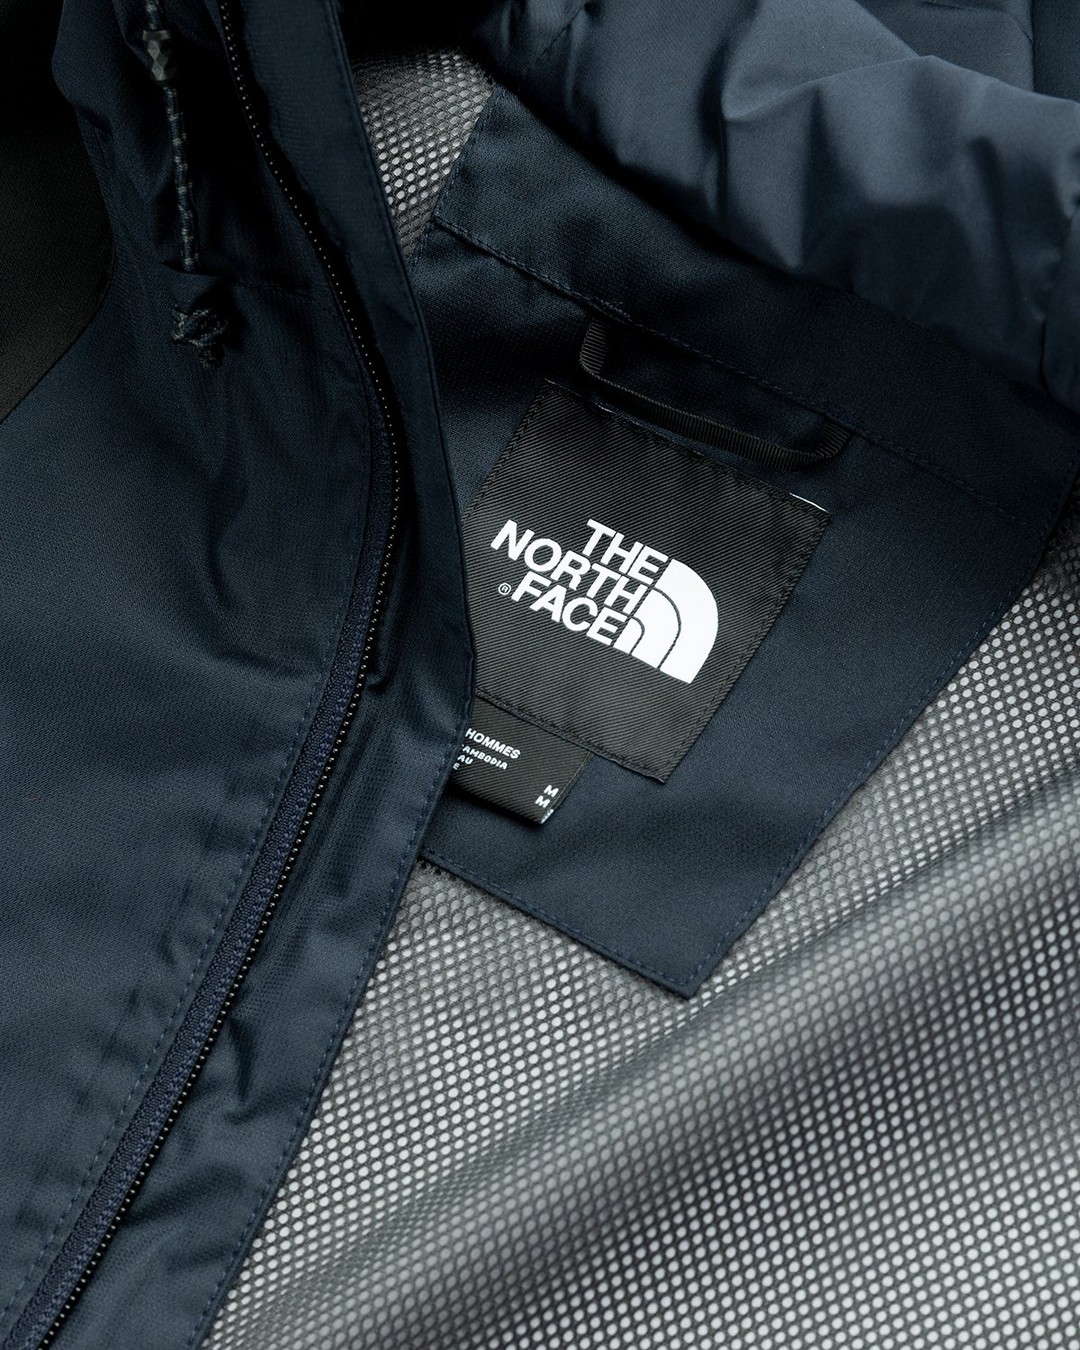 The North Face – Farside Jacket Aviator Navy - Outerwear - Blue - Image 4